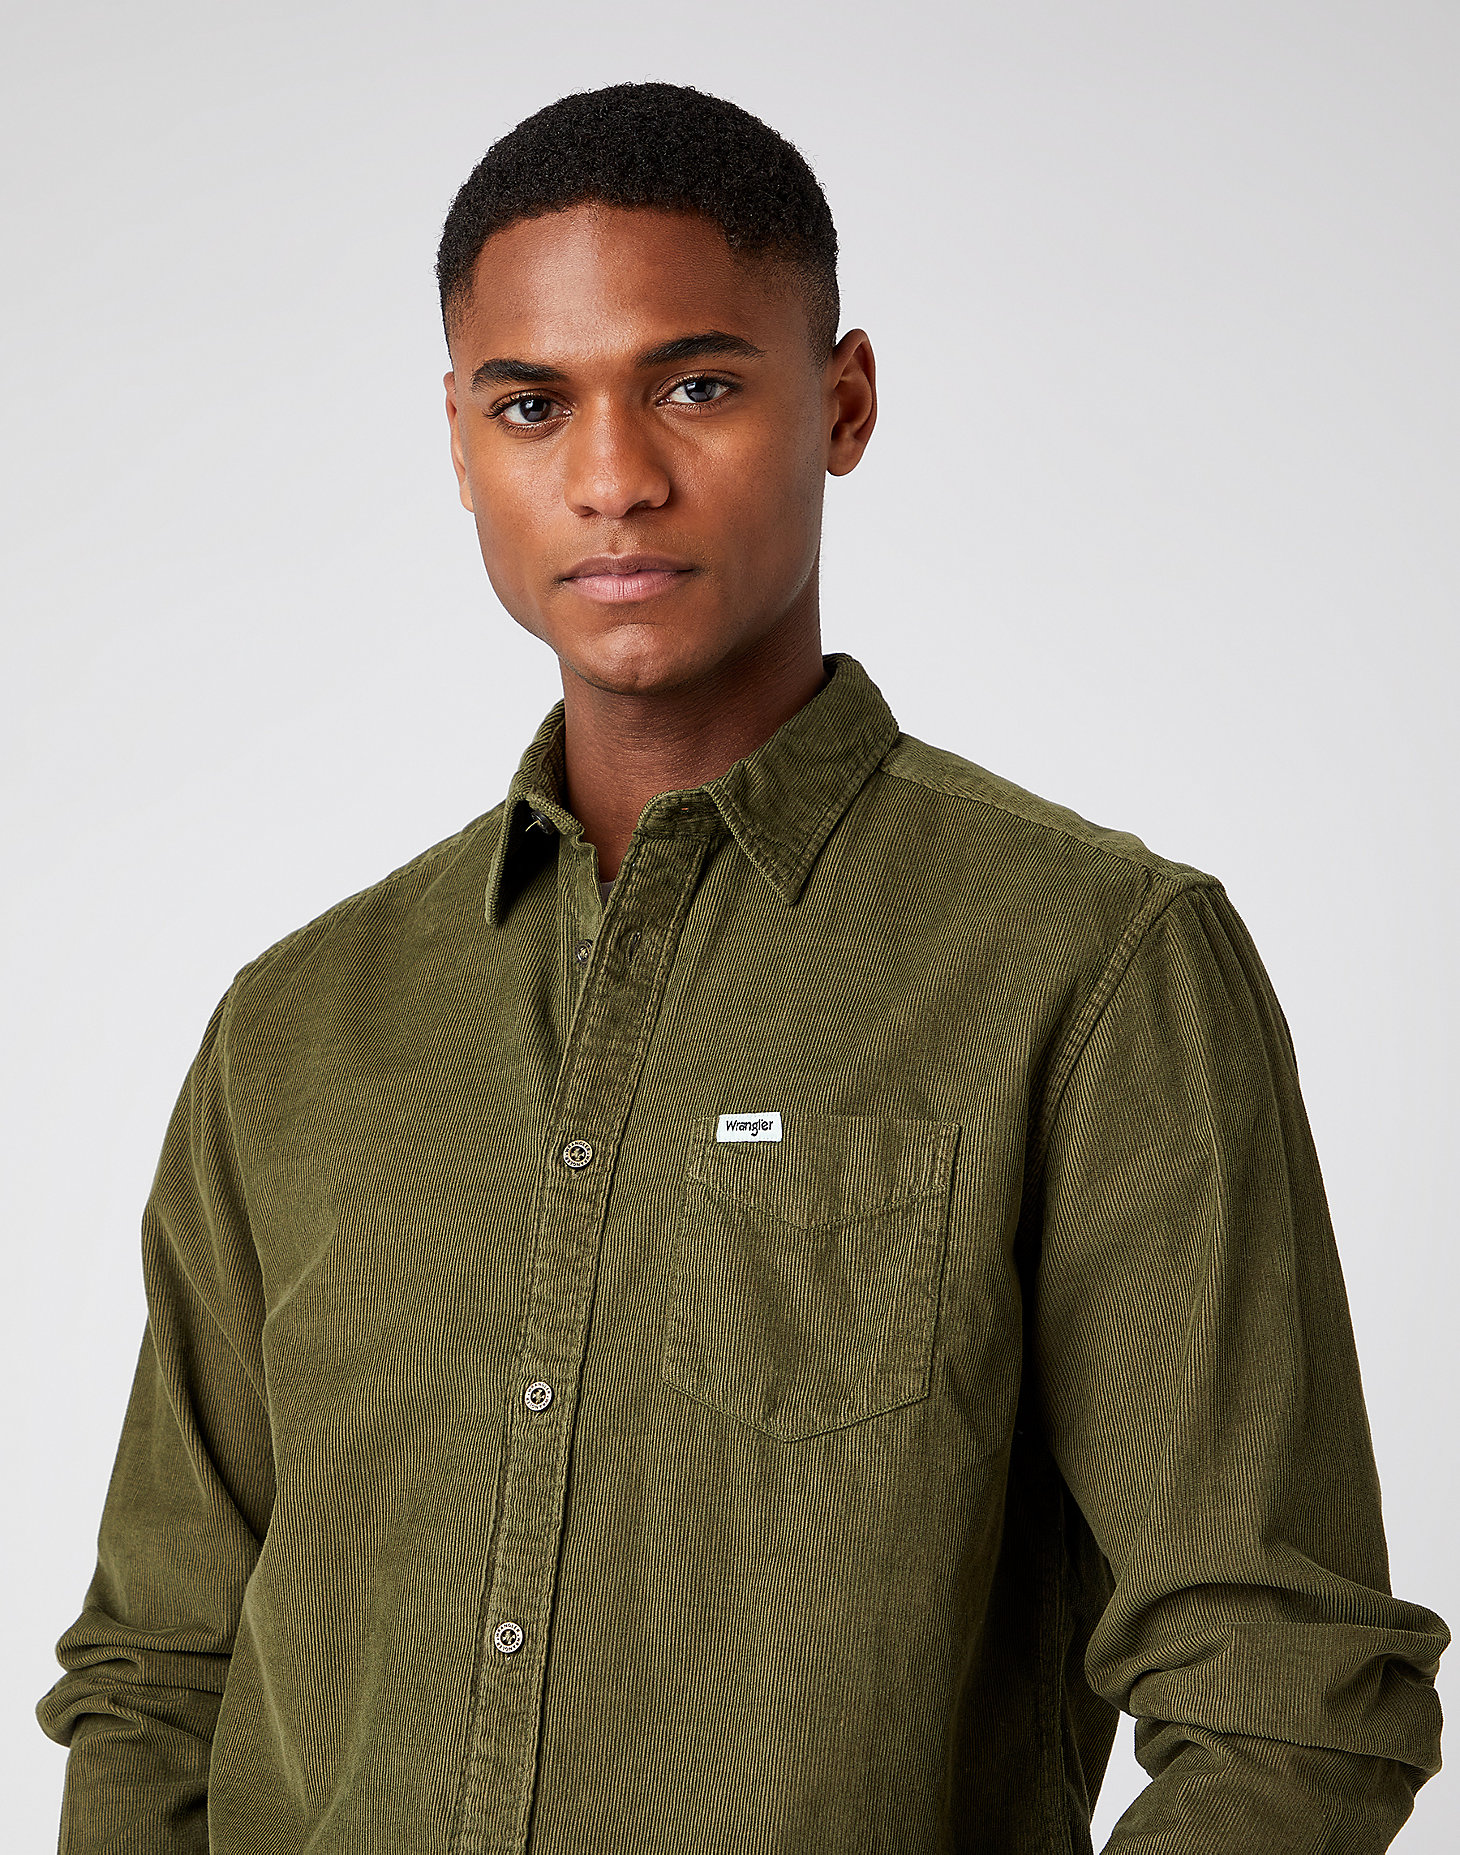 One Pocket Shirt in Ivy Green alternative view 3